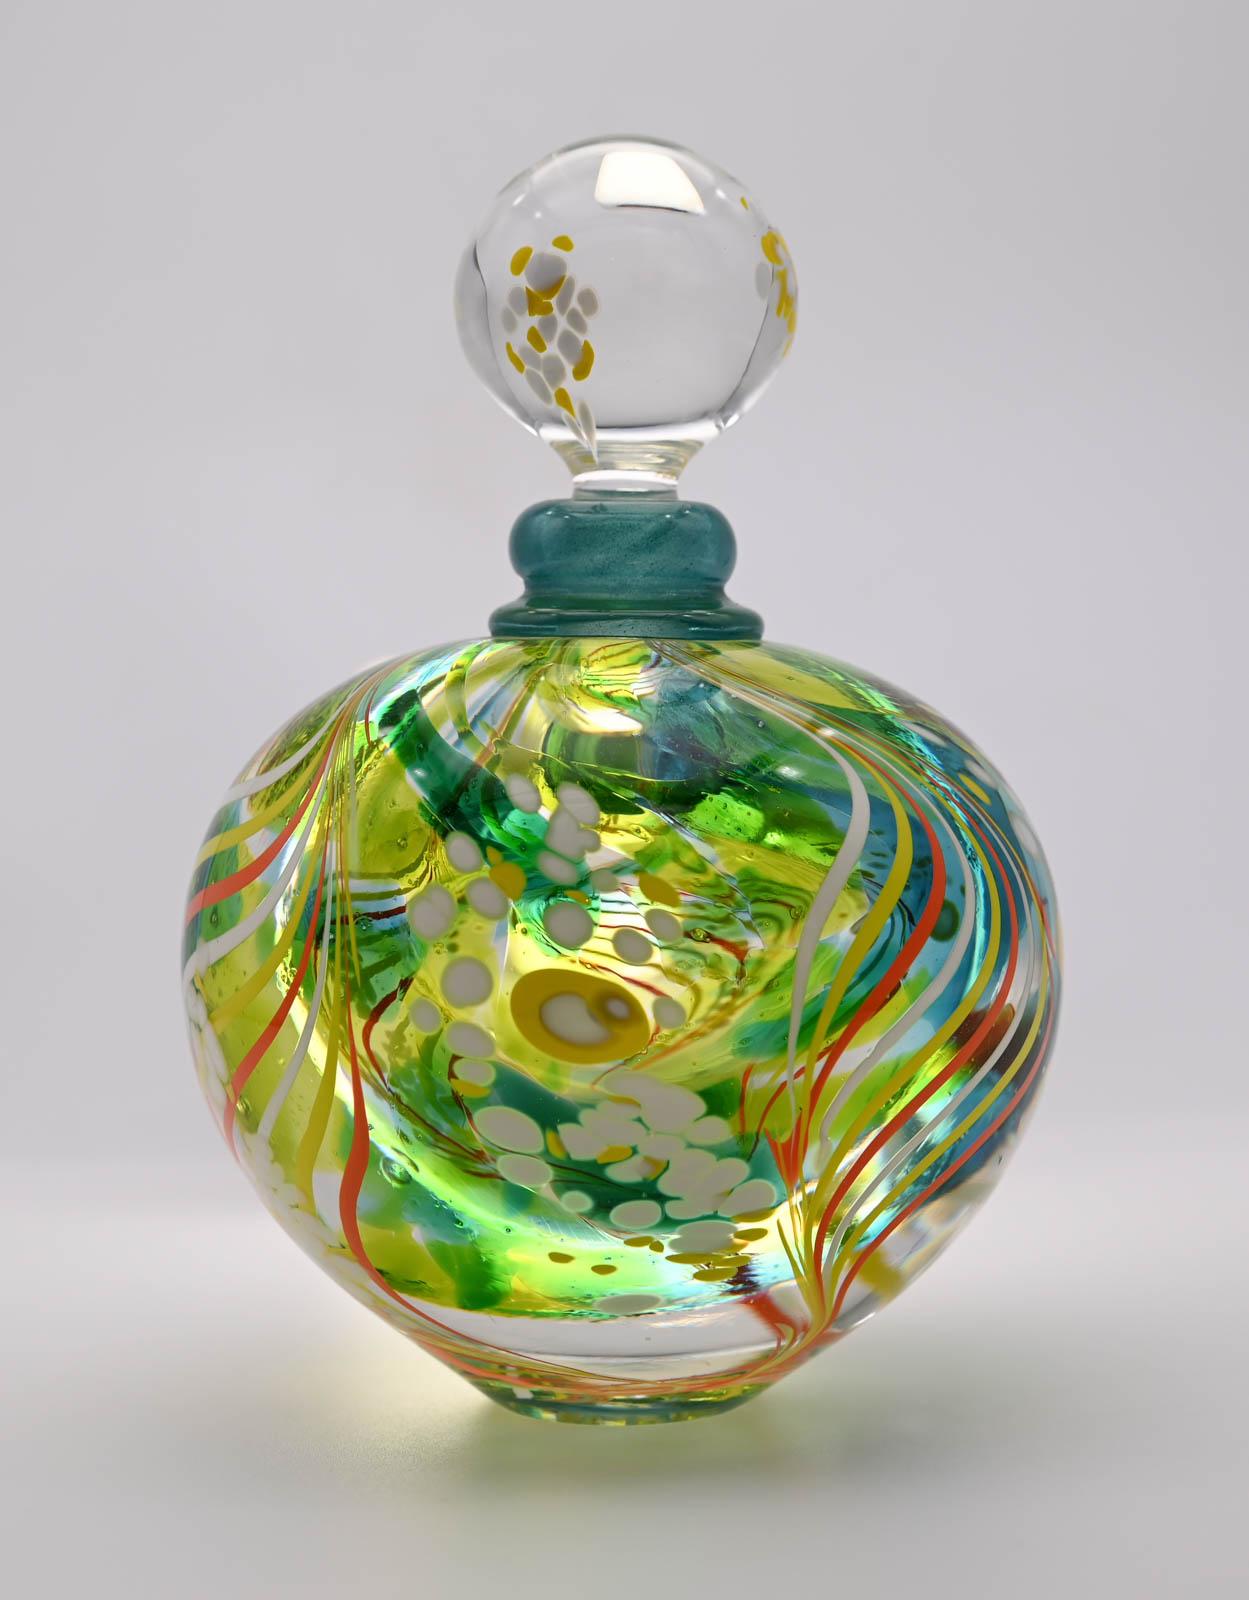 Jorge MATEUS
French master glassmaker

Flacon déco vert et jaunet, 2021

Art Glassware - Unique piece
Size : 17,5 x 11,5 x 11,5 cm
Signed on the base.
In perfect condition.

Sold with invoice and certificate of authenticity.
Fast and careful